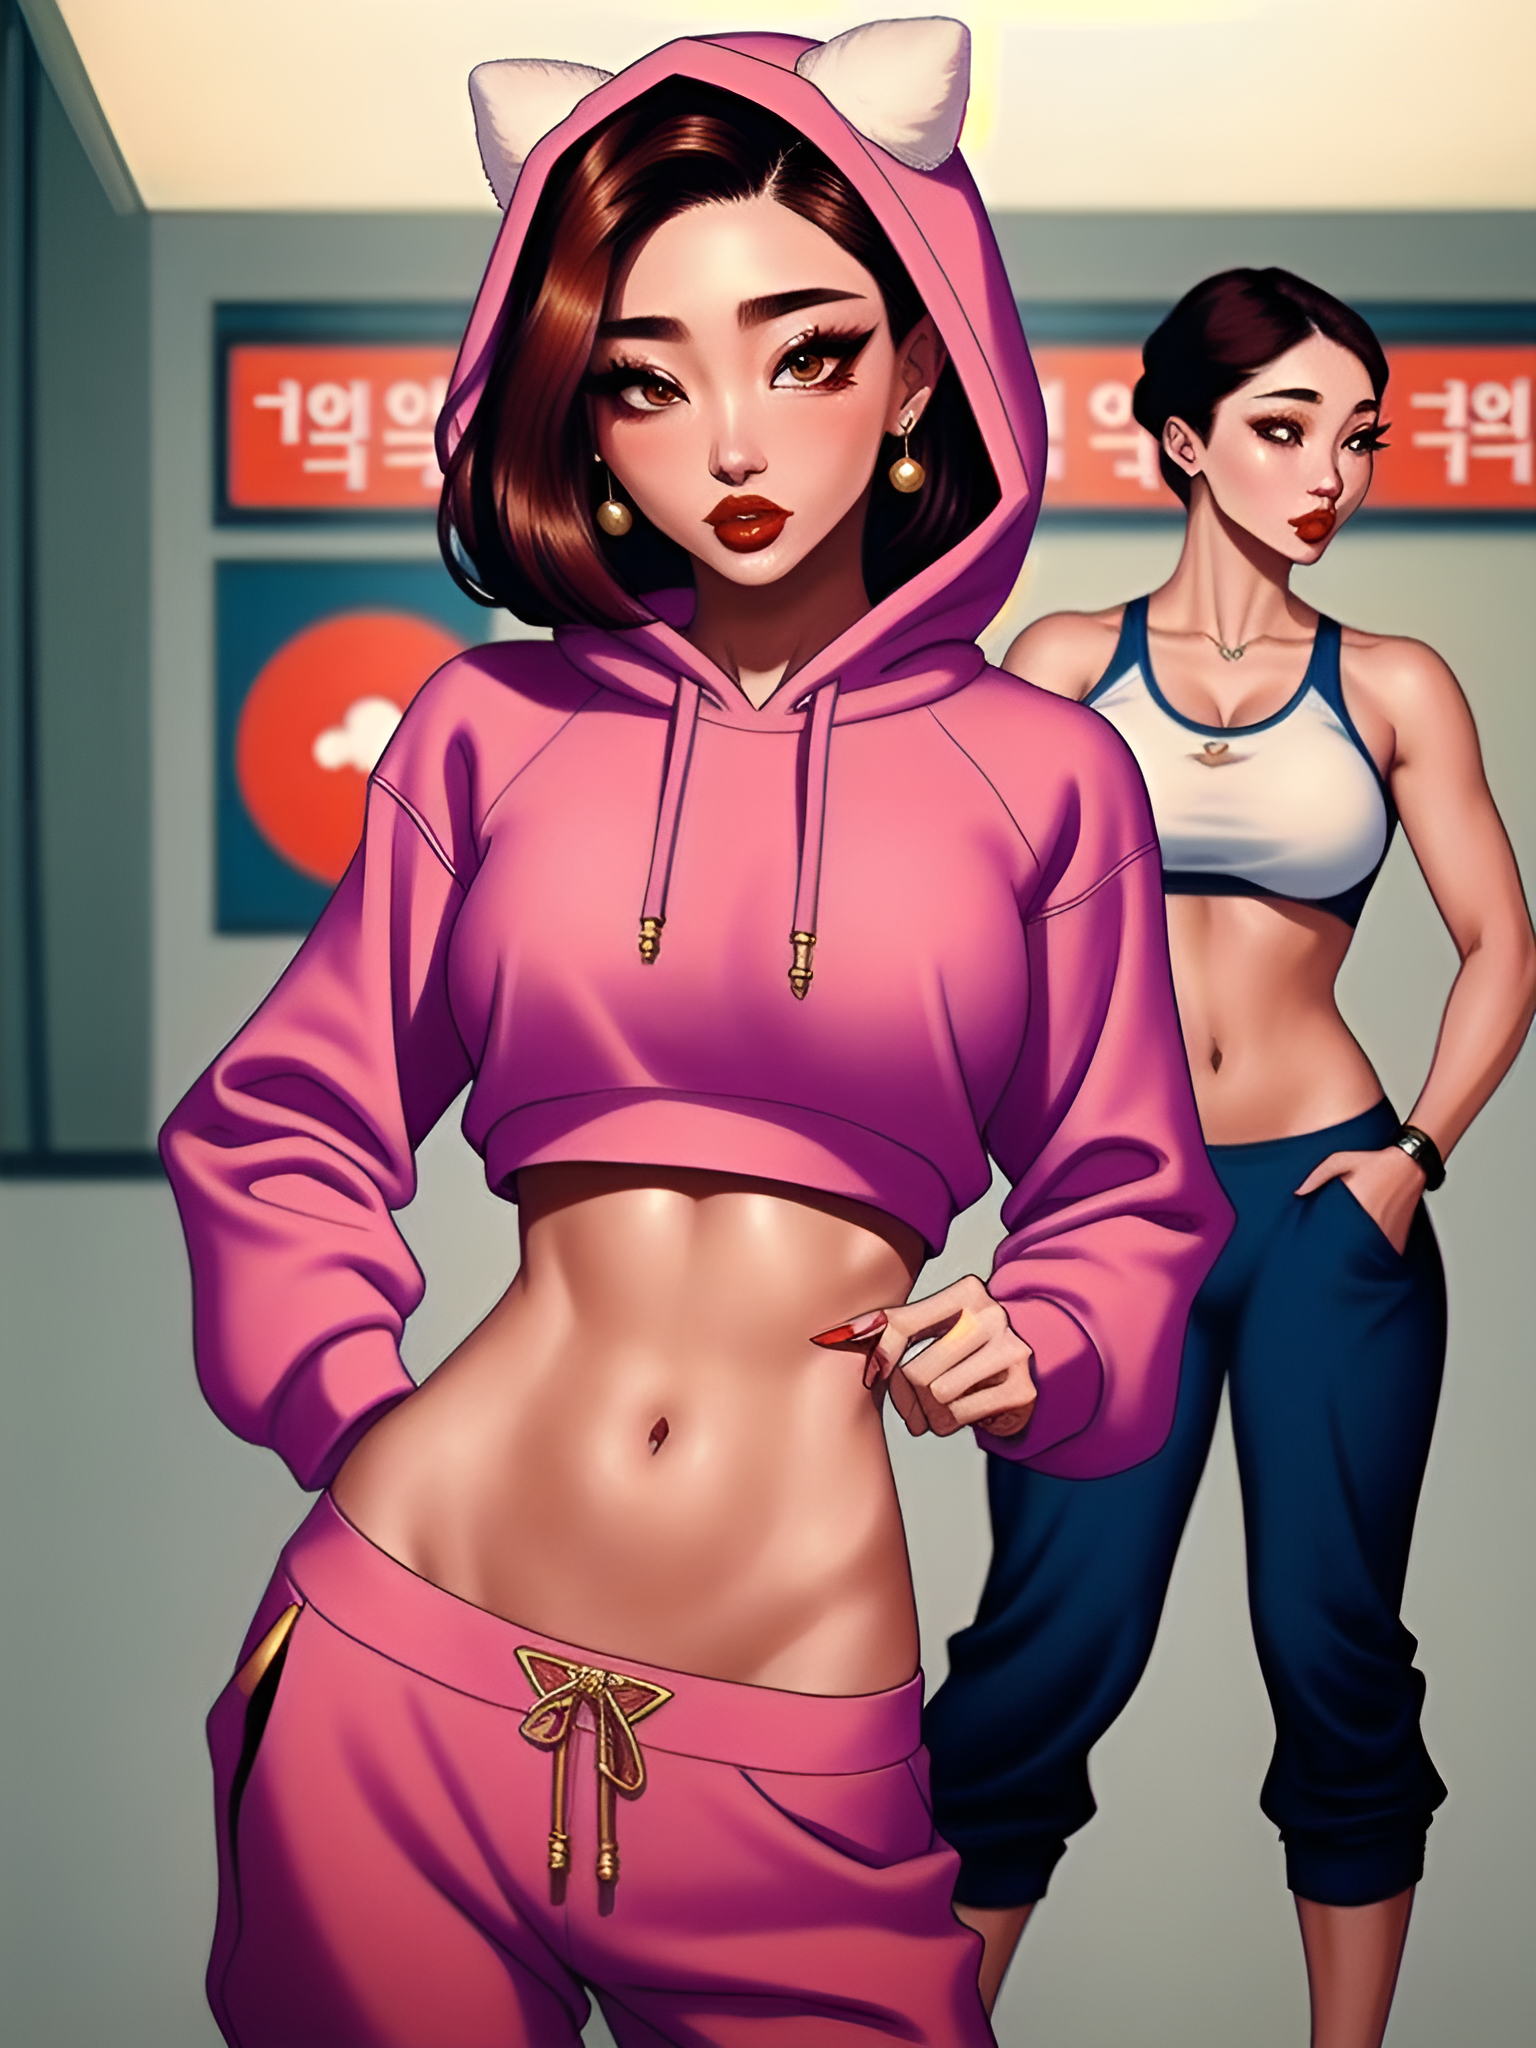 Anime 1536x2048 AI art anime girls sporty portrait display belly belly button earring looking at viewer hoods sweatshirts nopan two women